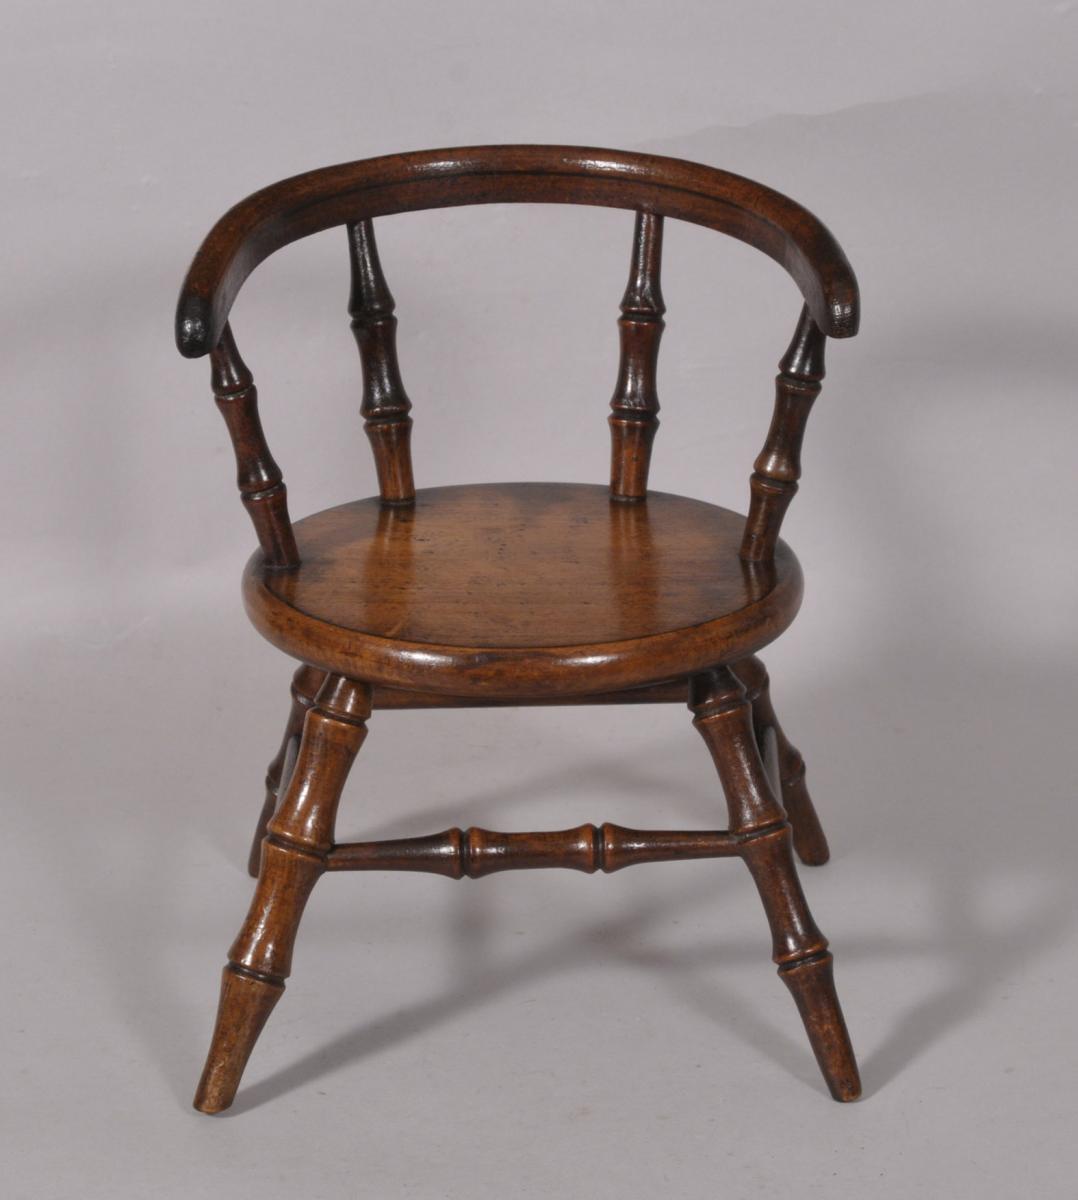 S/5594 Antique Victorian Period Simulated Bamboo Miniature Chair